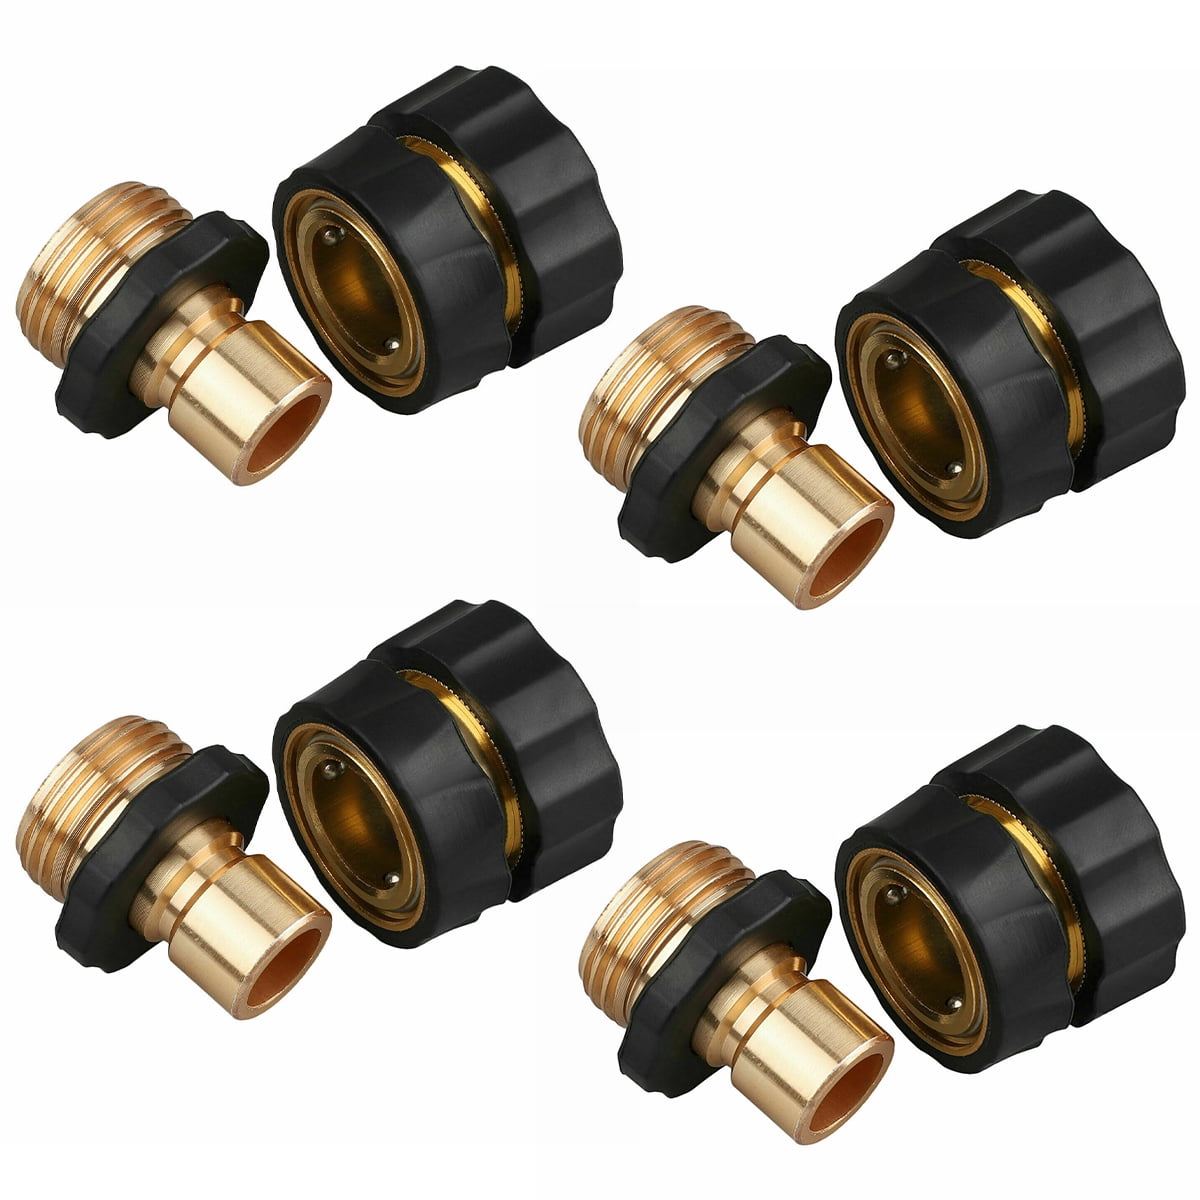 KAHEIGN Brass Garden Tap Adaptors Hose Expandable Stretch Fittings Tap 1/2 Inch 